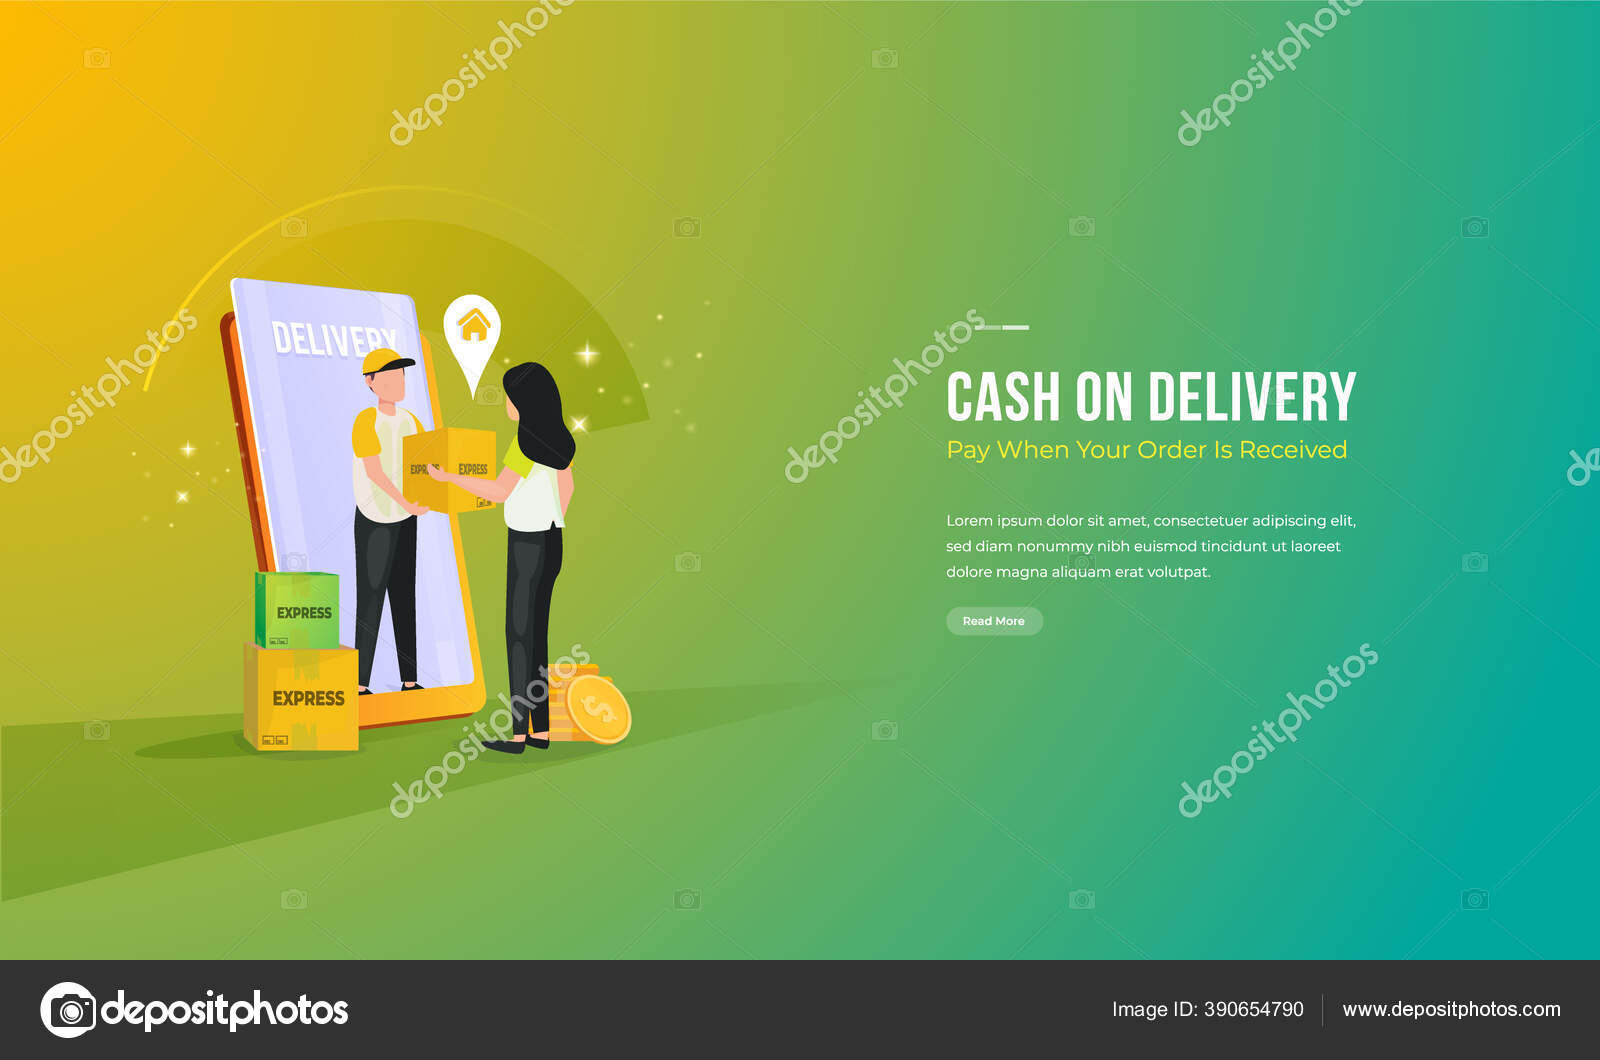 Cash on delivery movie hong kong